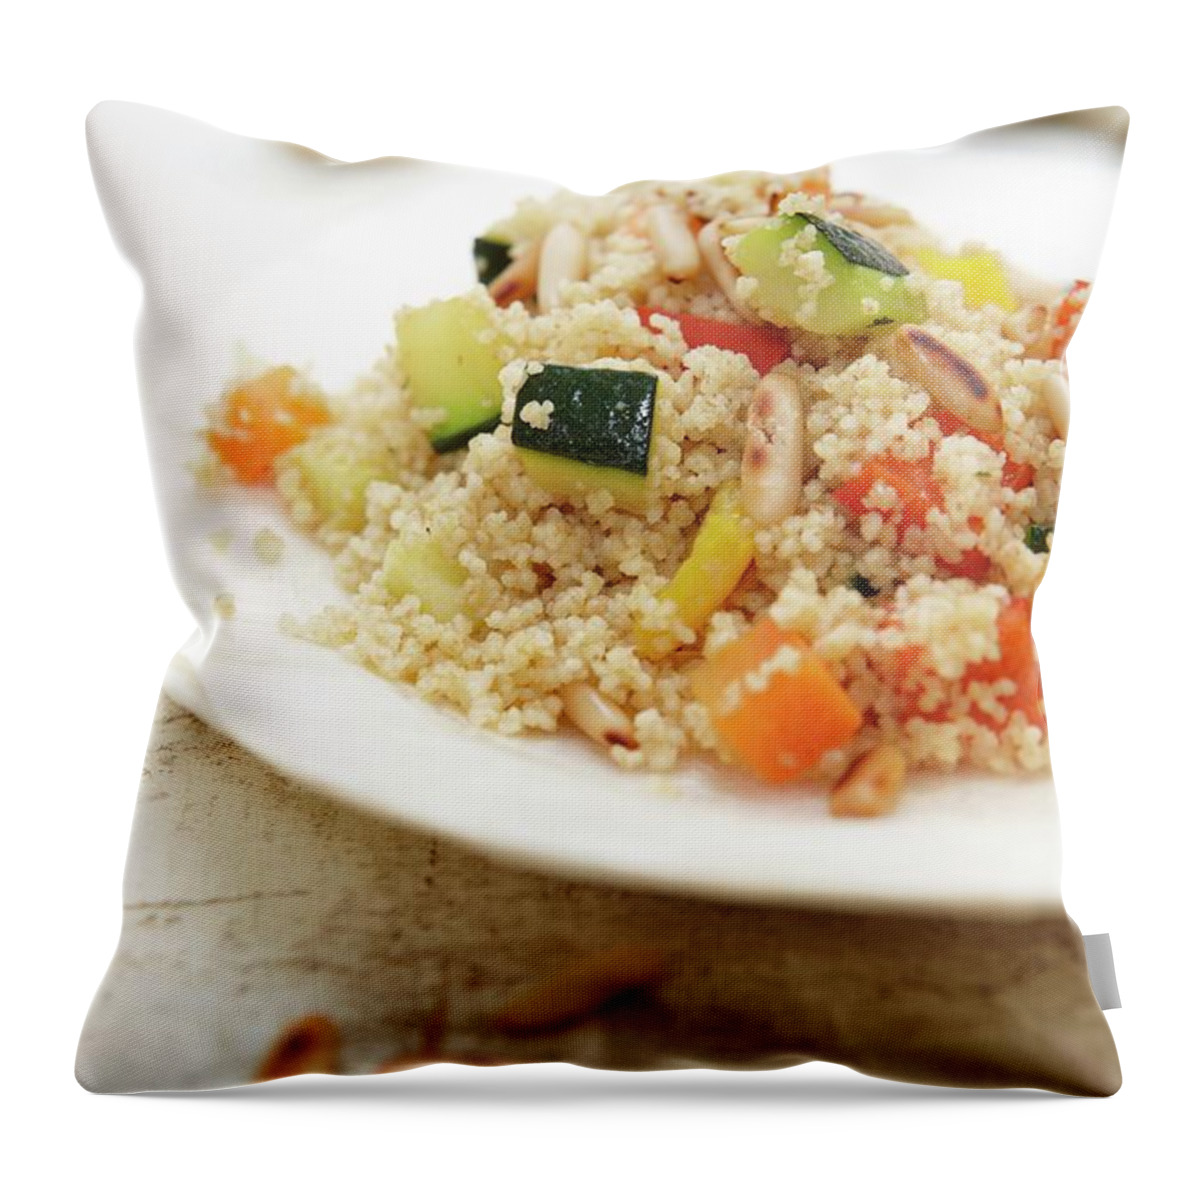 Ip_11199224 Throw Pillow featuring the photograph Couscous With Vegetables And Pine Nuts by Kirchherr, Jo